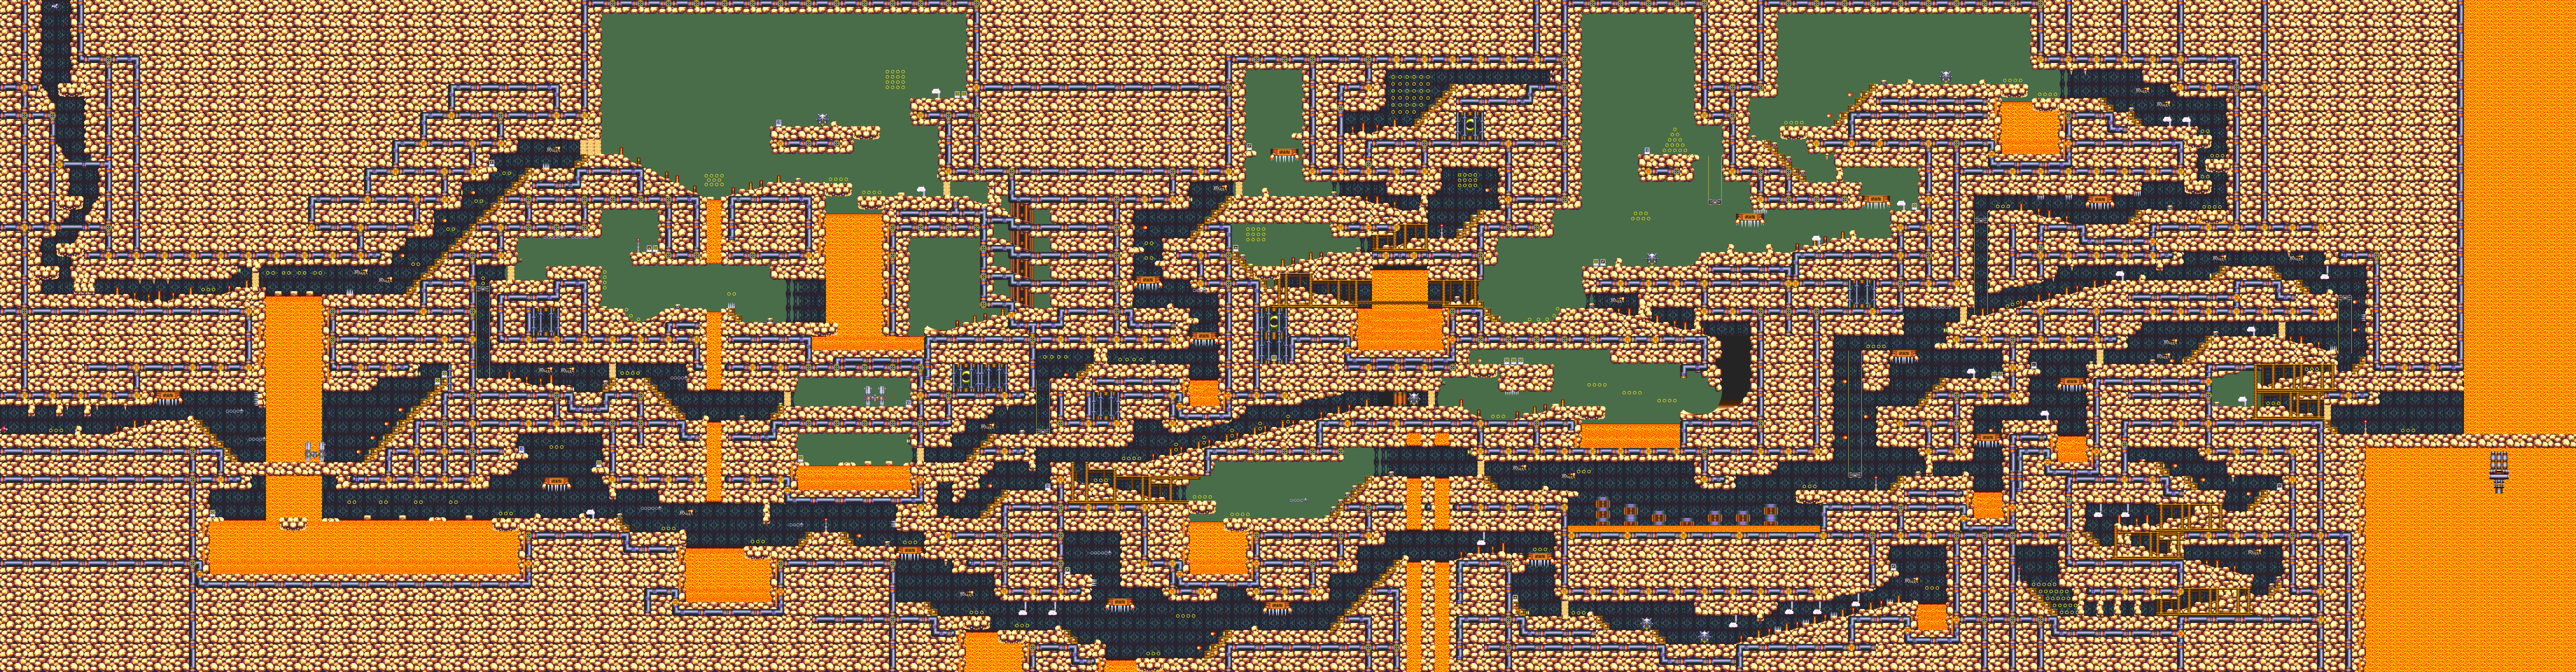 SonicandKnuckles MD Map Lr1.png